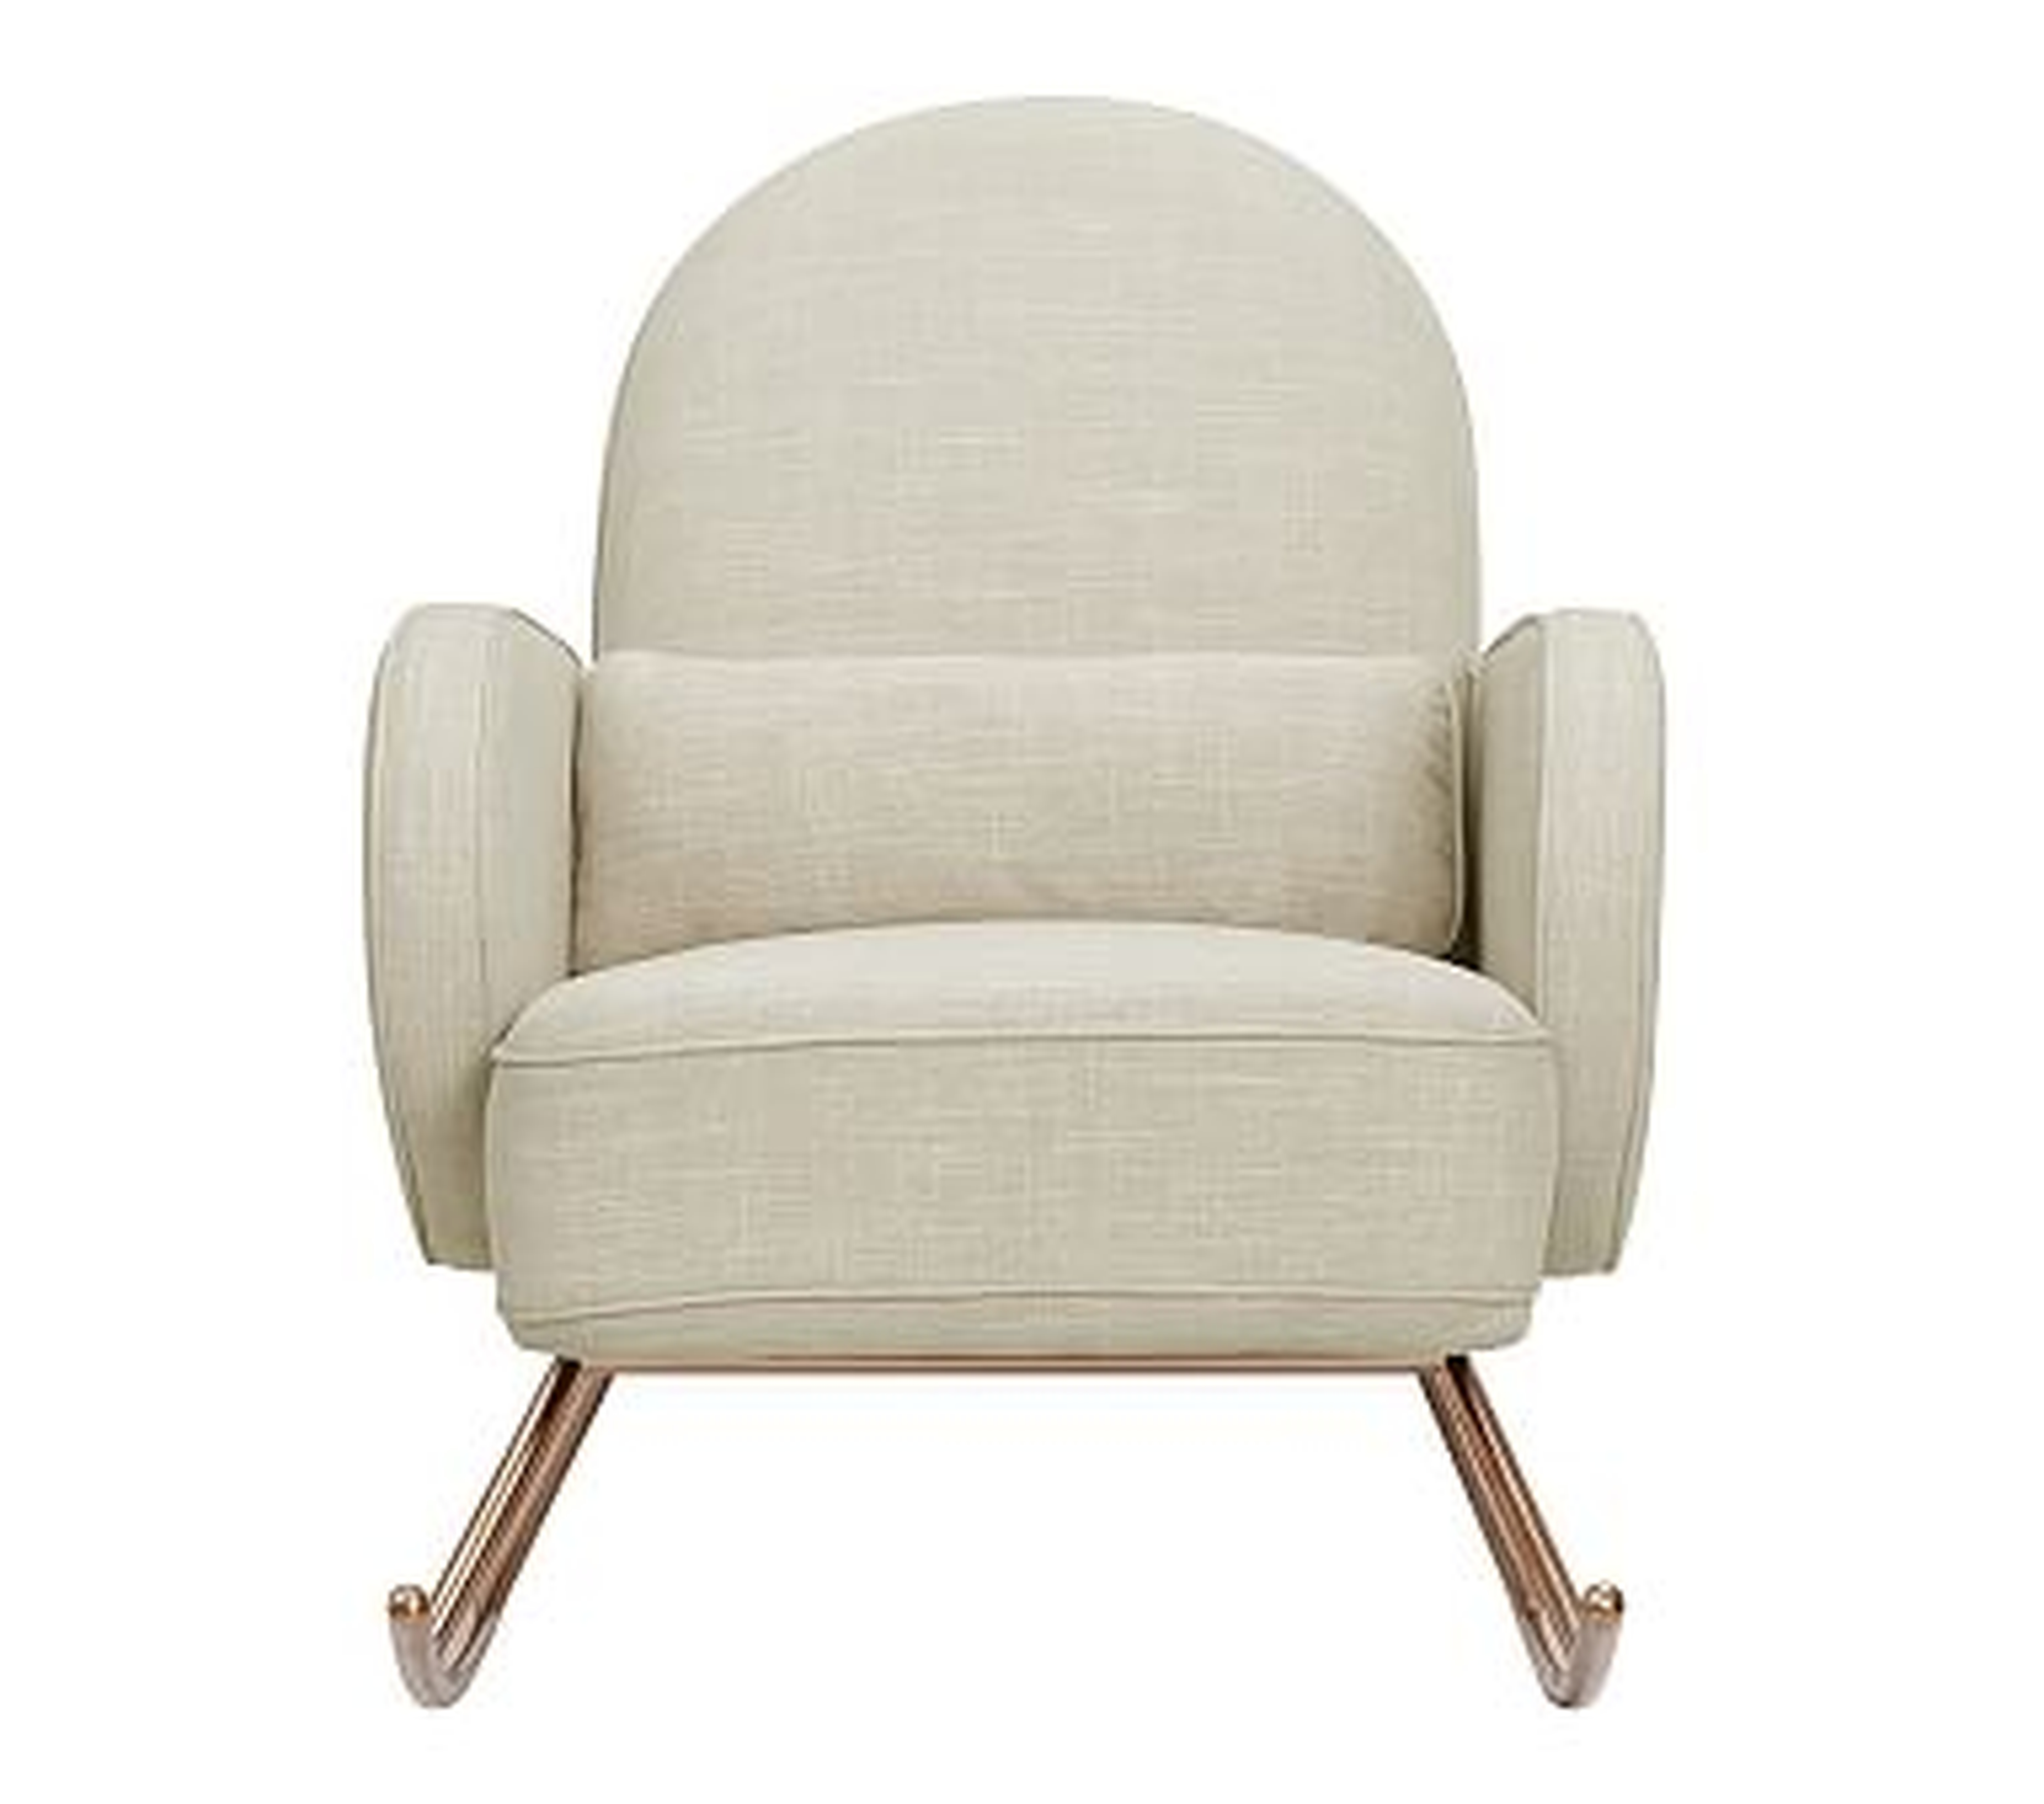 Nursery Works Compass Rocker, Oatmeal, Unlimited Flat Rate Delivery - Pottery Barn Kids